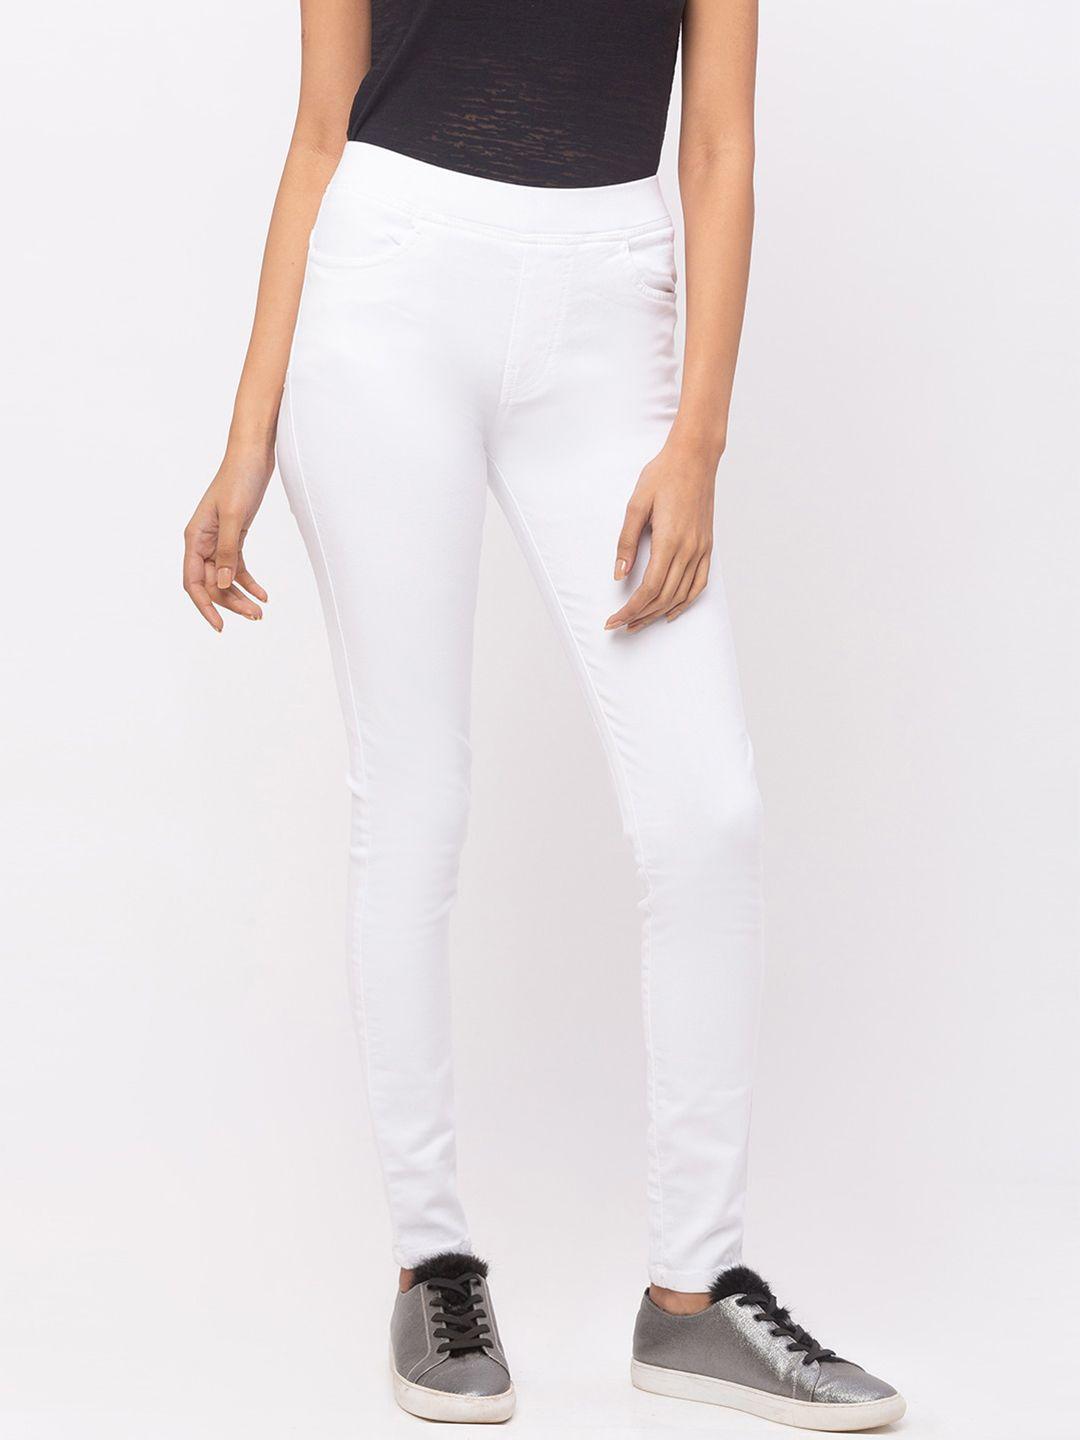 zola-women-white-solid-relaxed-fit-cotton-jeggings